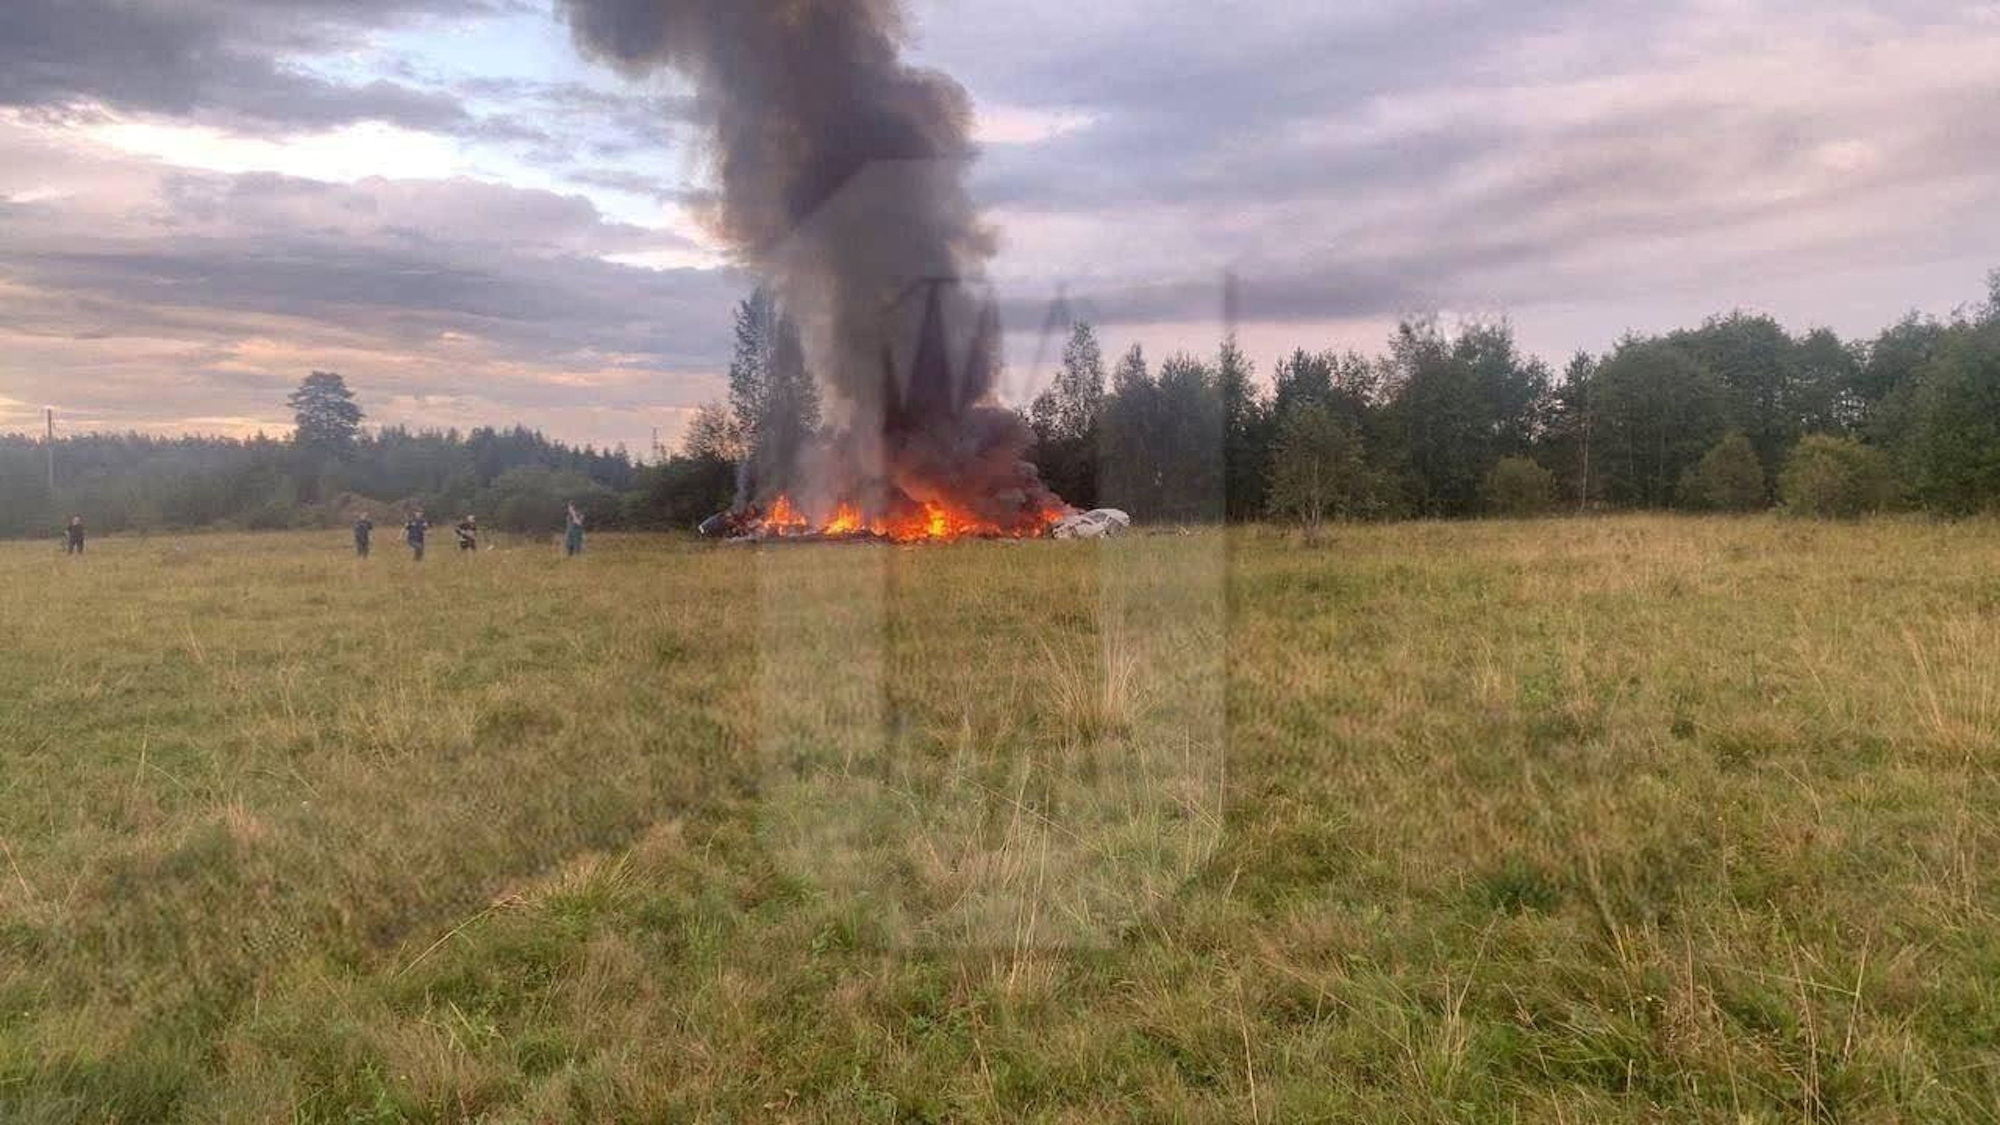 A  plane wreckage is seen on fire following an alleged air acciden in the Tver region of Russia on Wednesday.